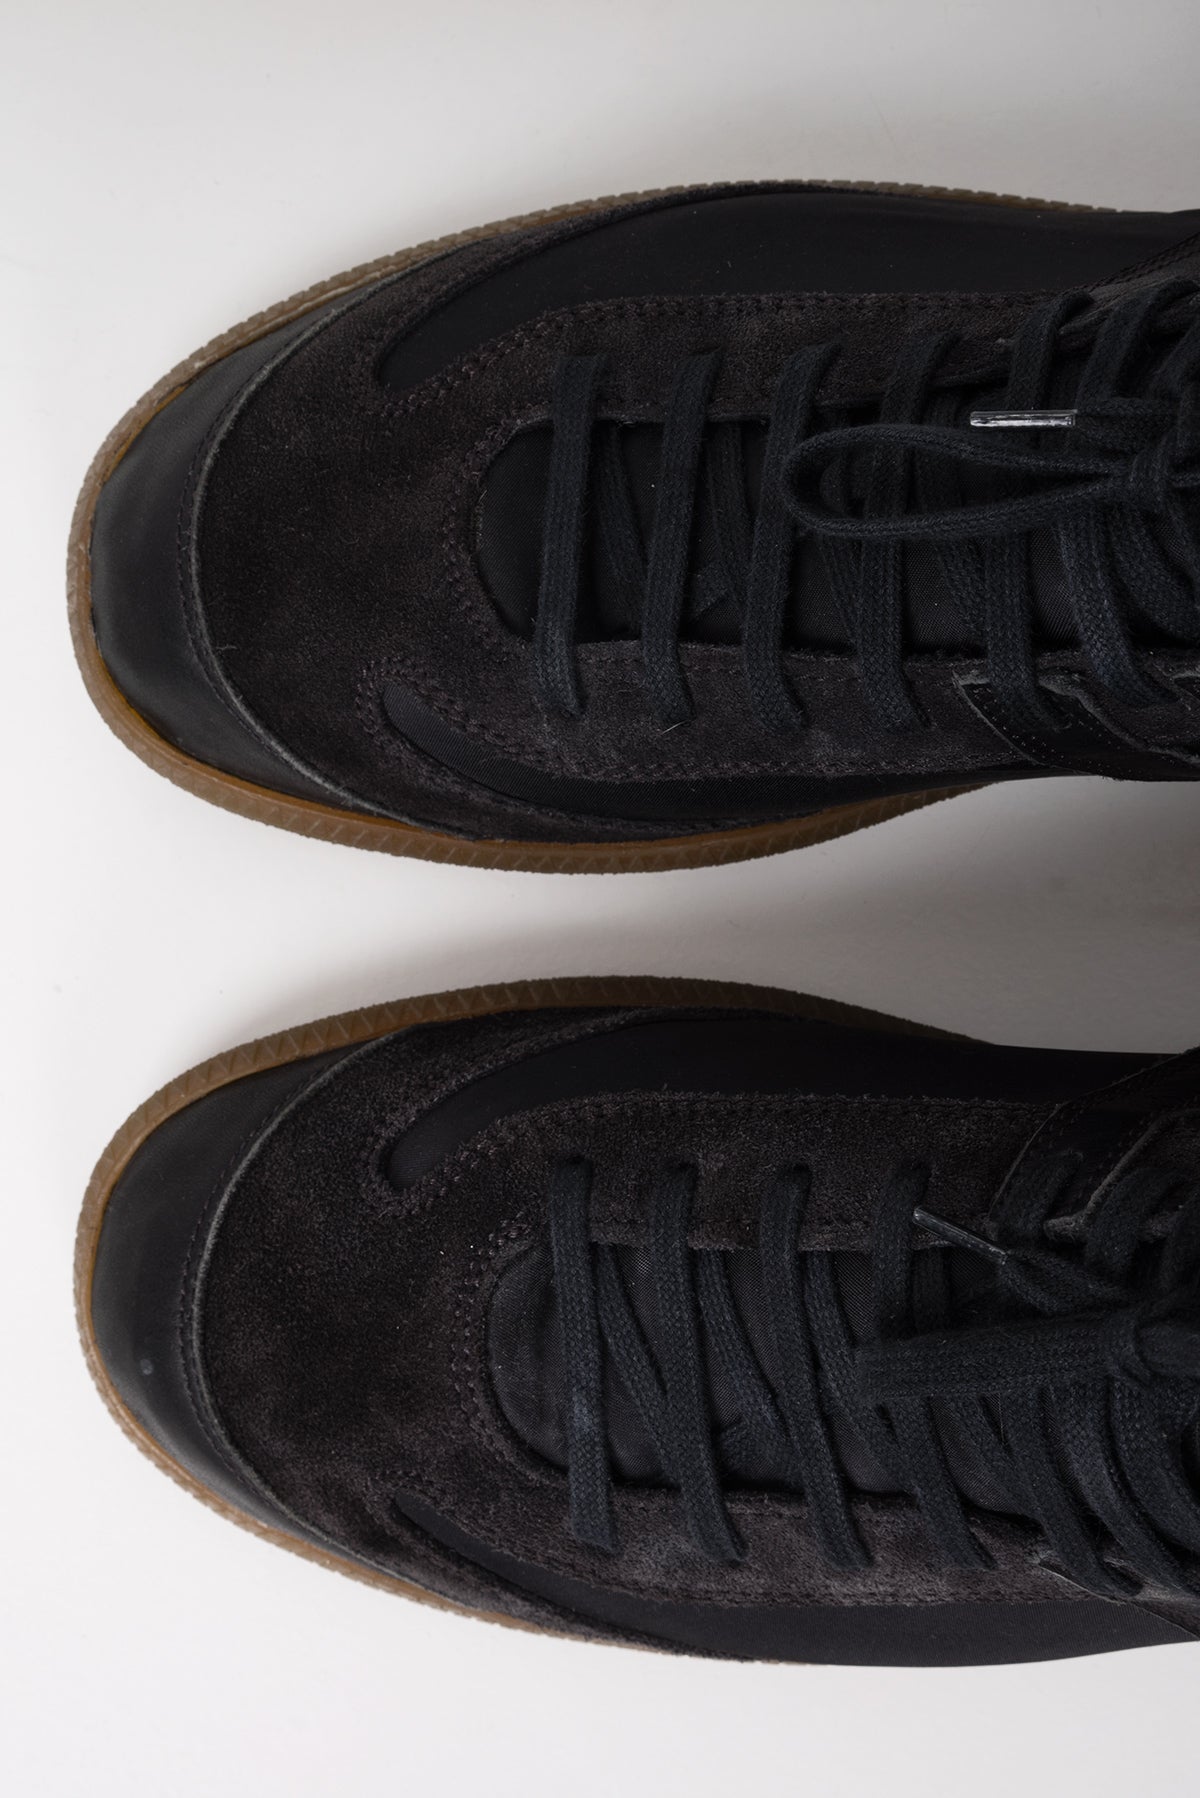 2006 S/S BLACK NYLON AND SUEDE GUM SOLE SNEAKERS